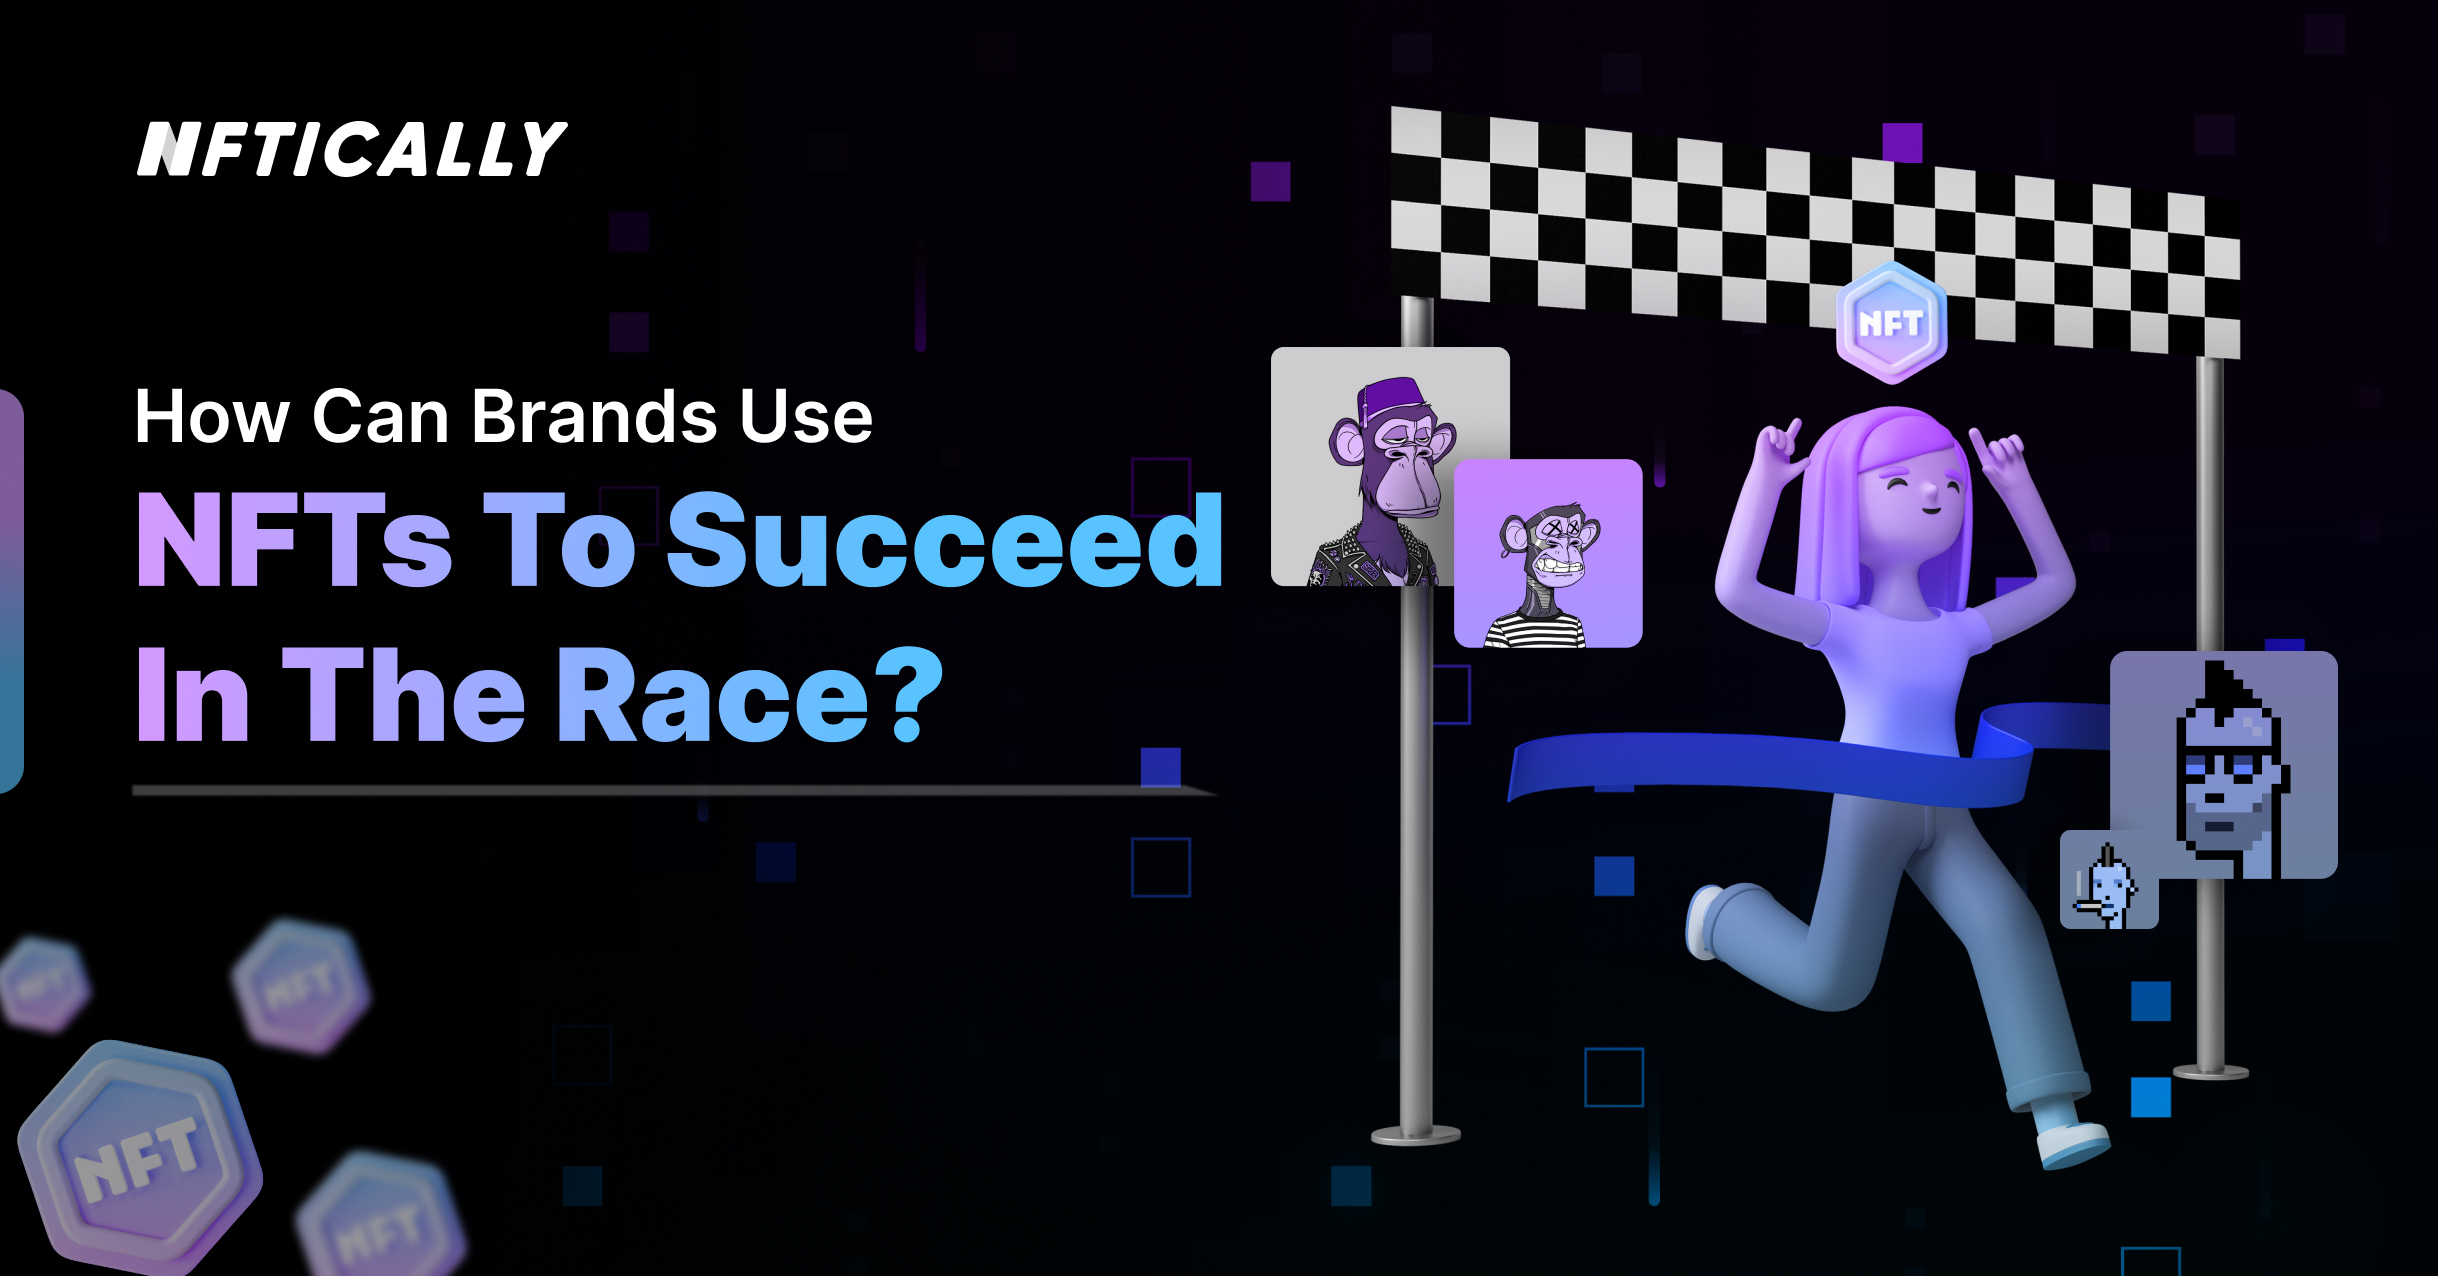 How can Brands use NFTs to succeed in the race?